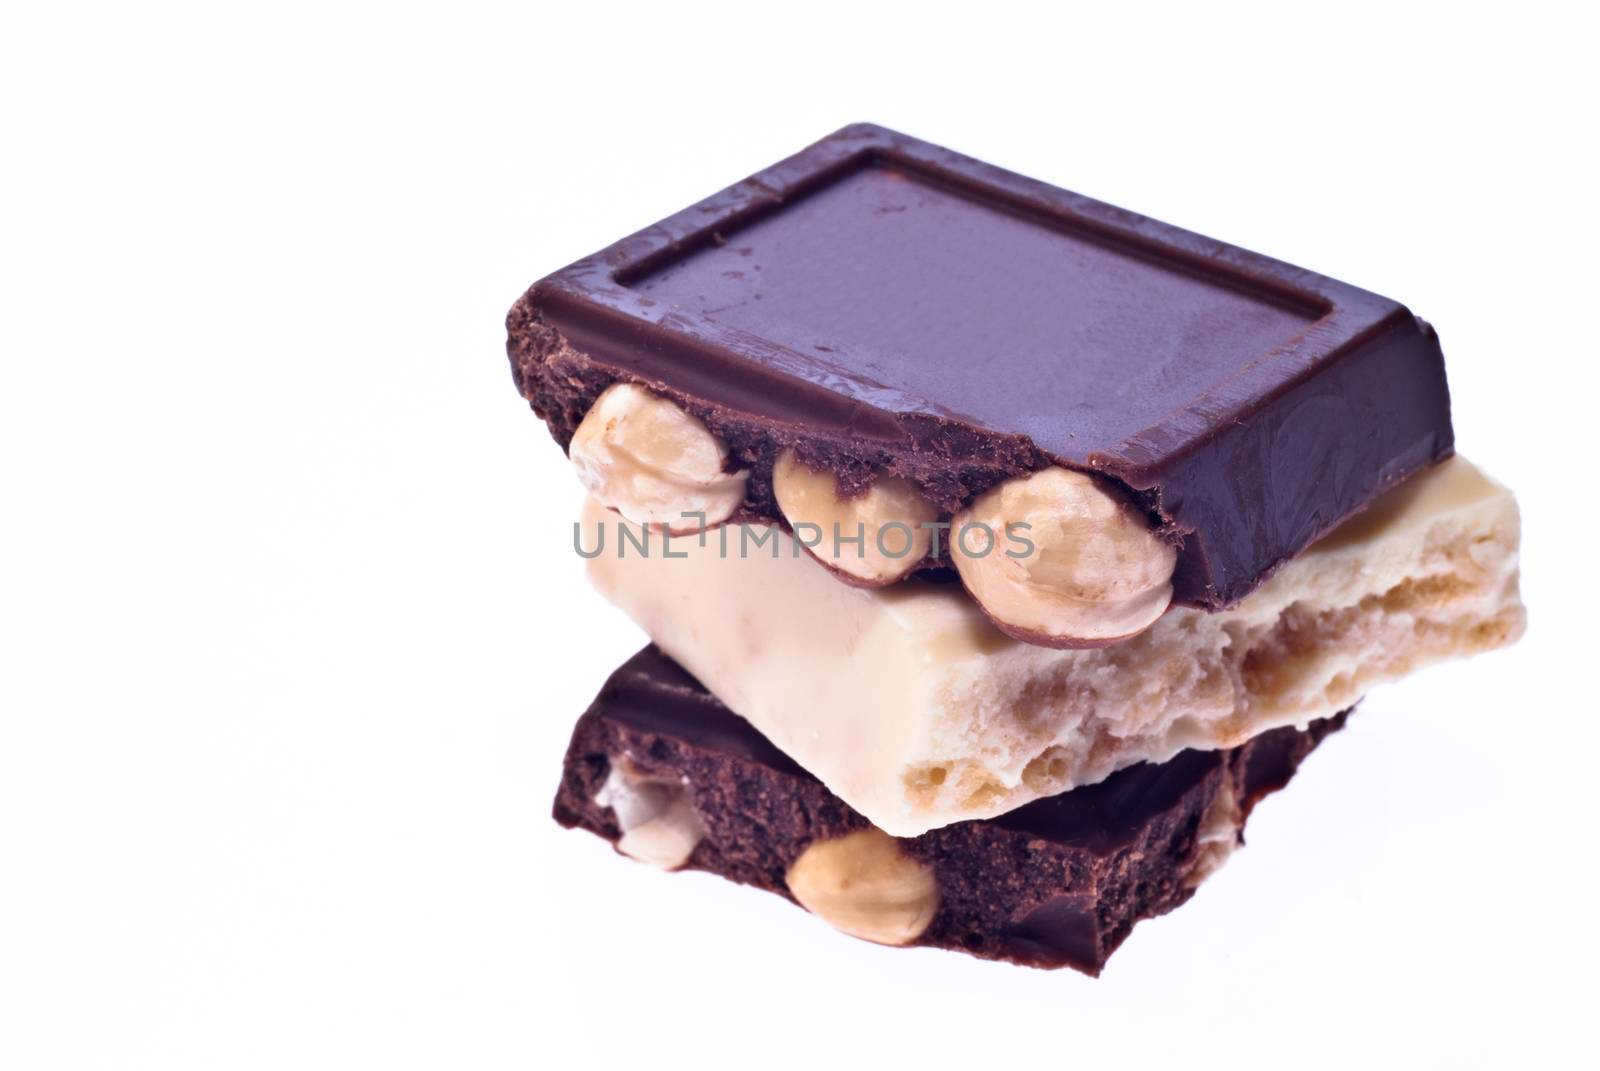 black and white chocolate bars with hazelnuts